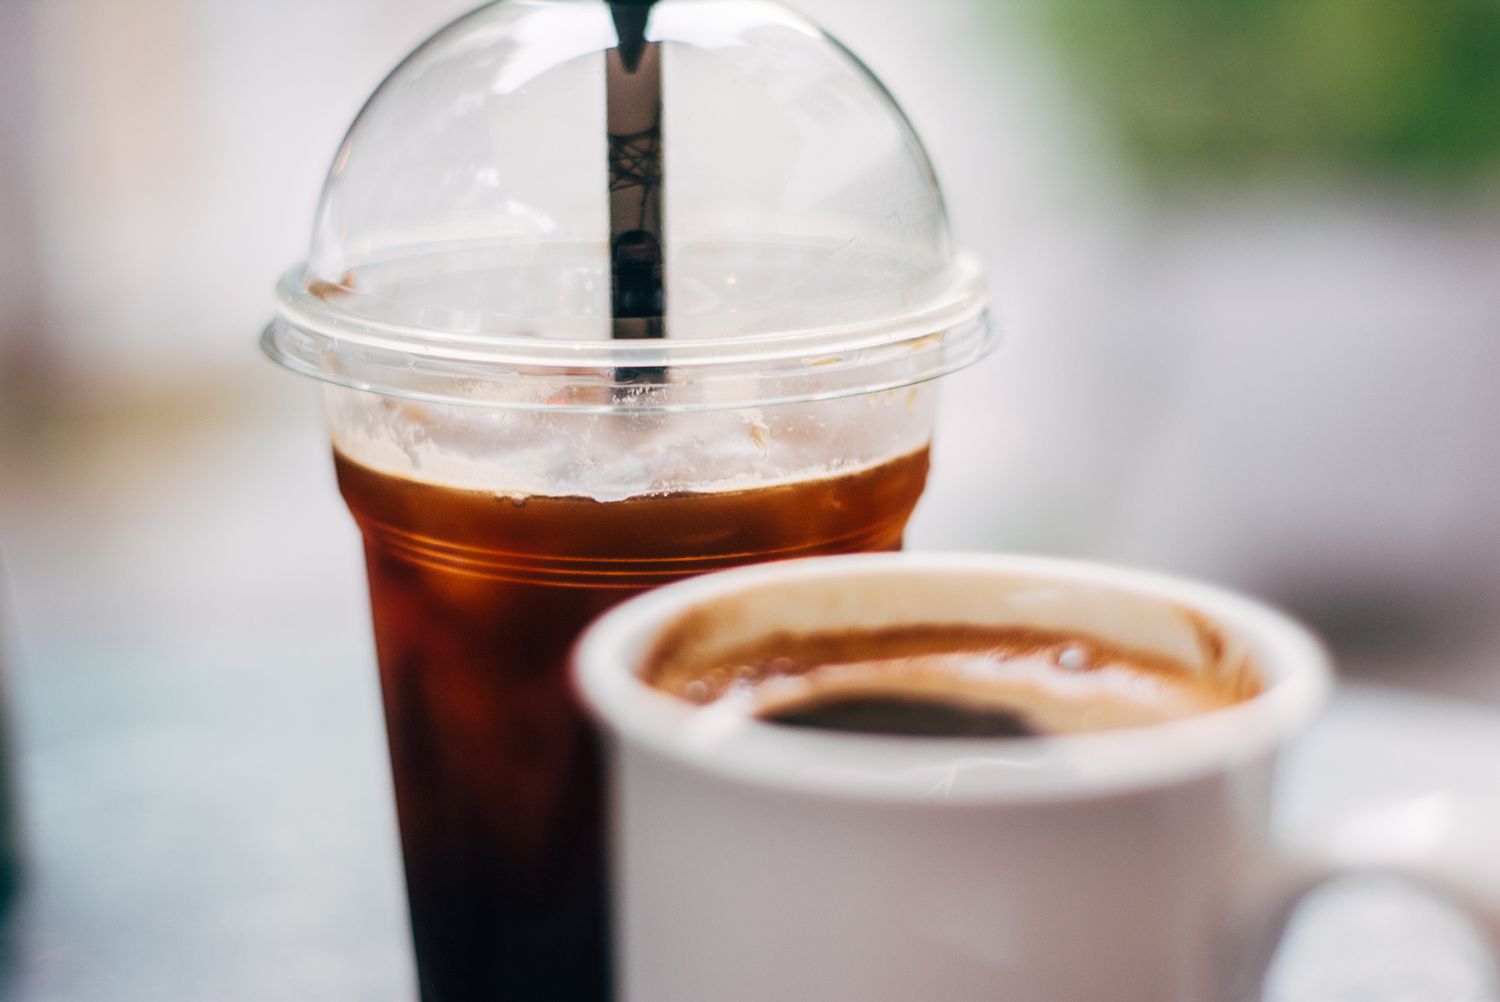 Cold Brew Vs Espresso – All the Differences You Need to Know